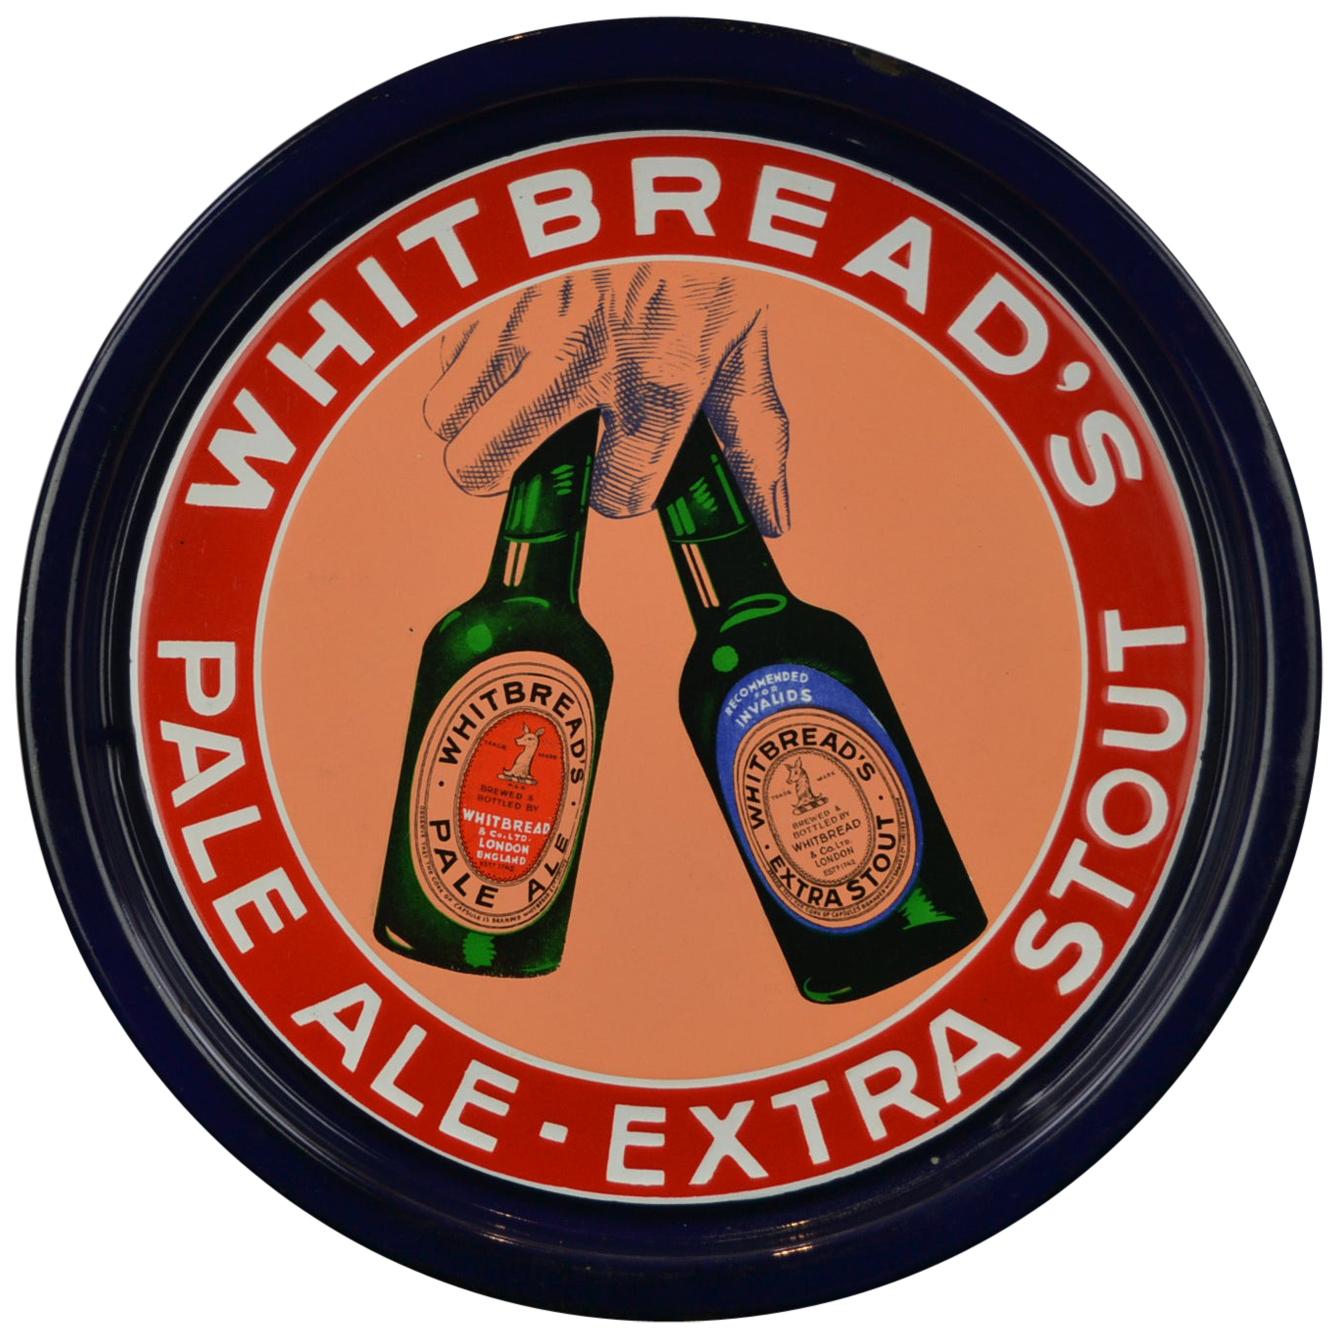 Enamel Tray Sign for Whitbread's Beer, Mid-20th Century